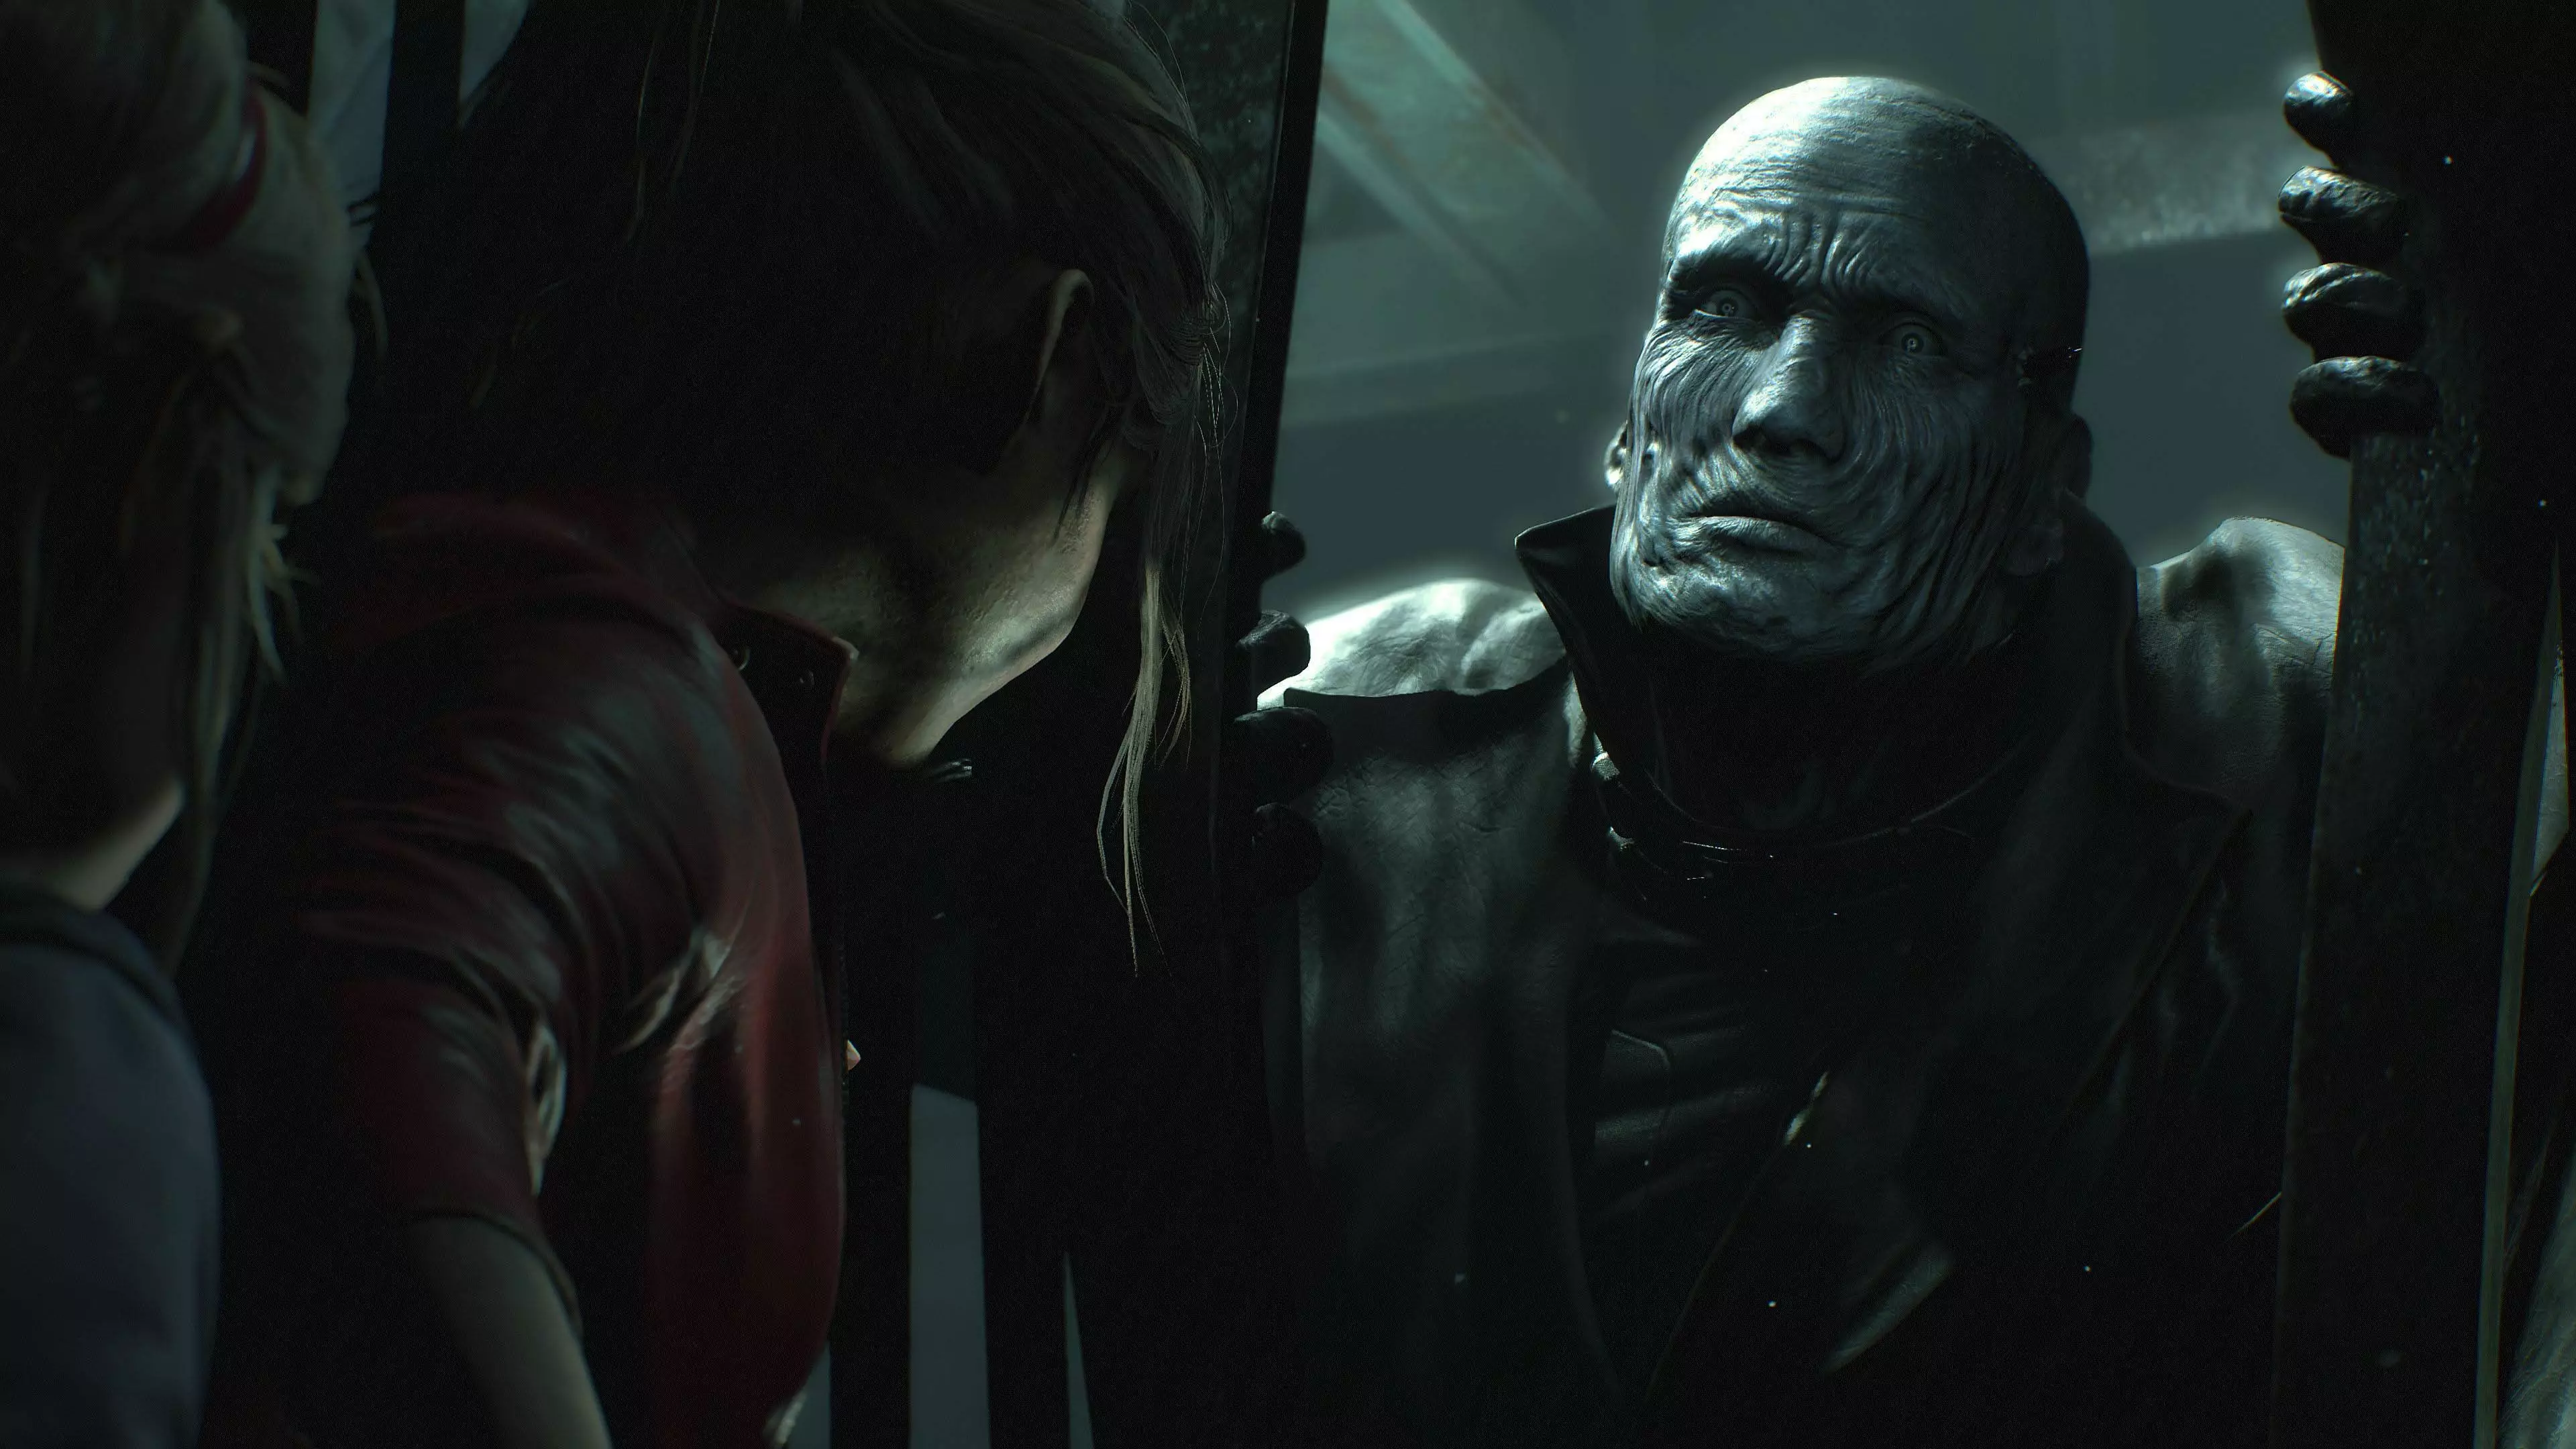 Mr X/Tyrant as he appears in Resident Evil 2 (2019) /